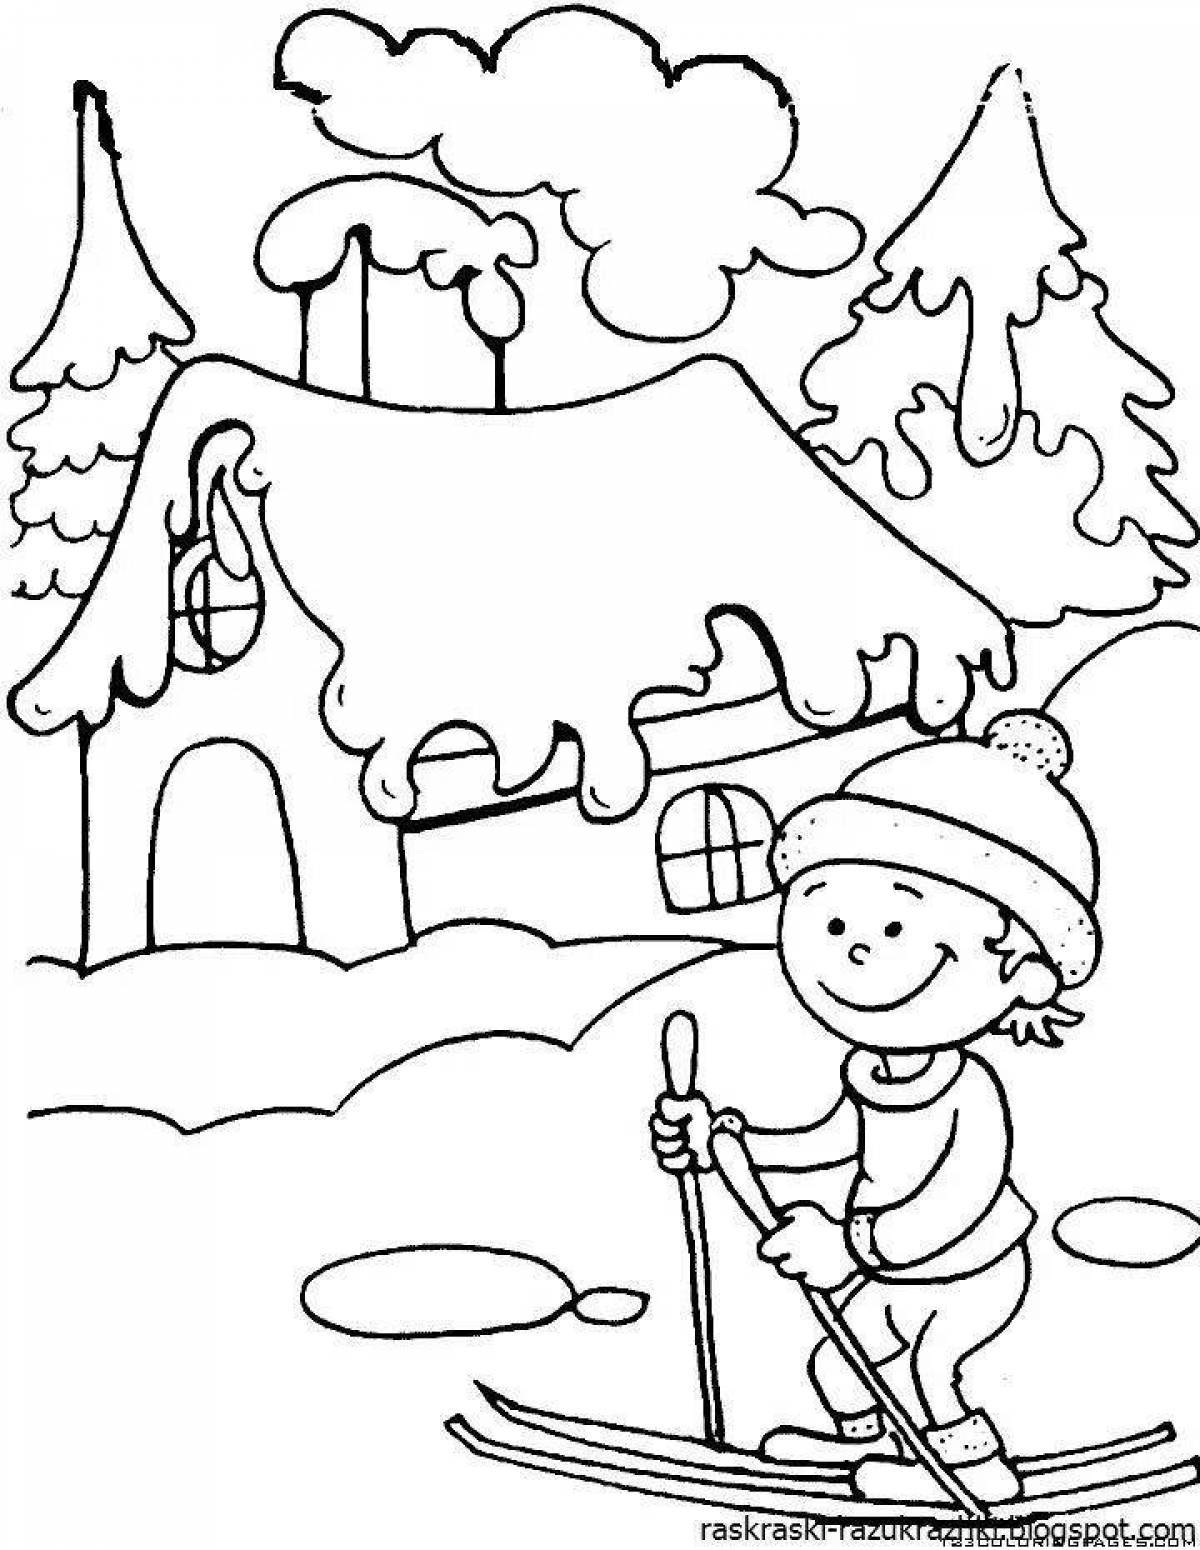 Whimsical children's winter coloring book